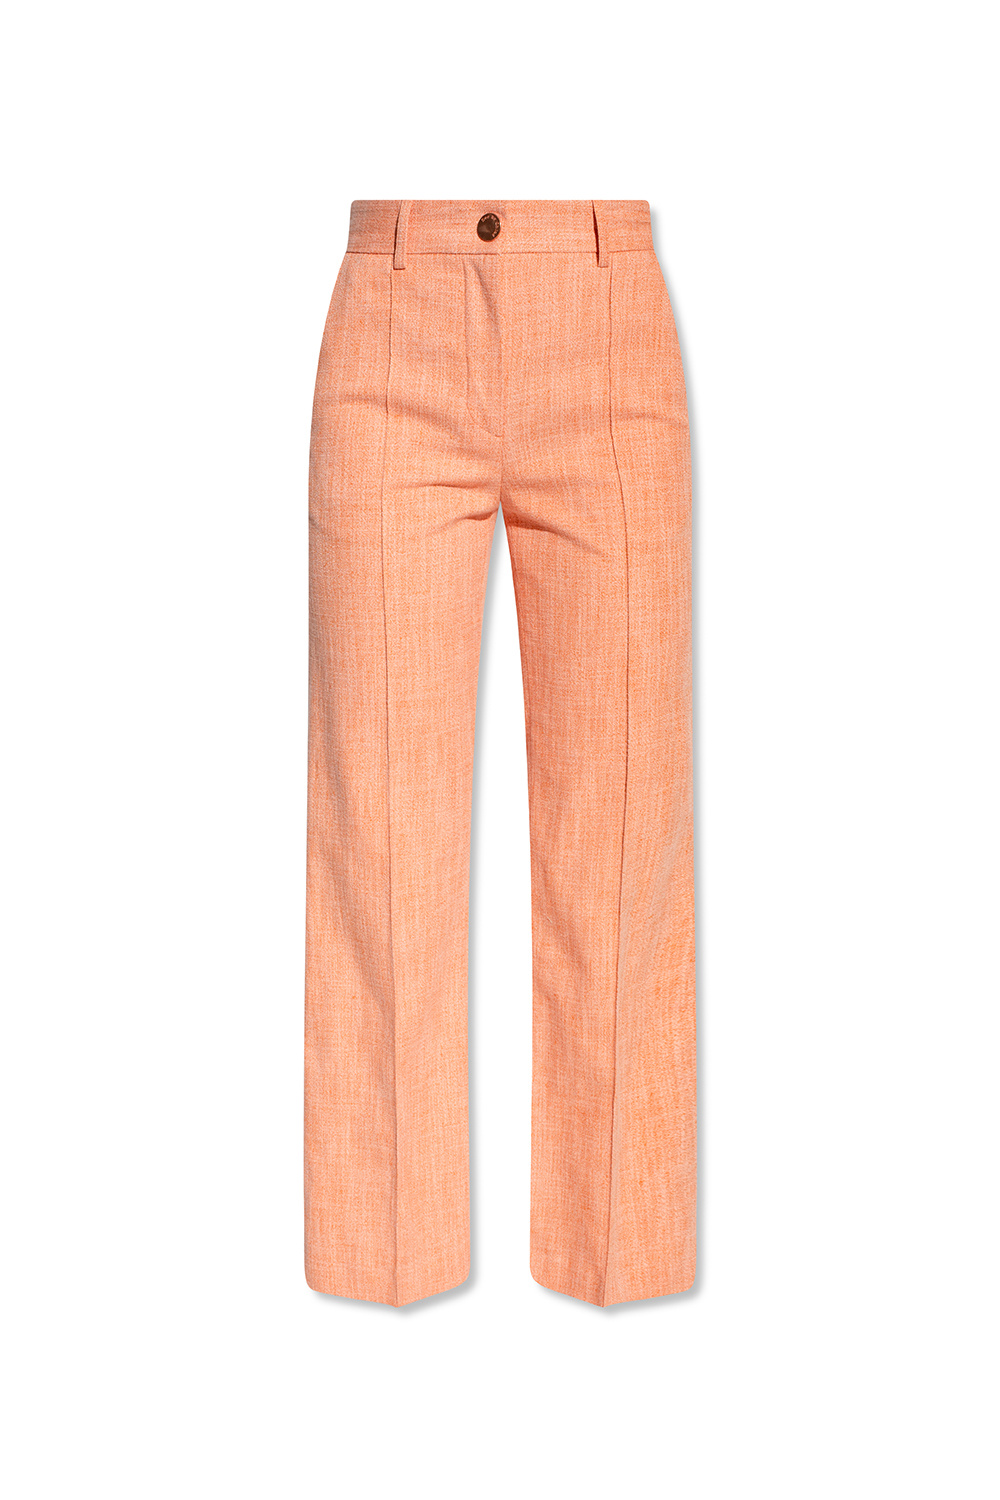 See By Chloé Flared trousers | Women's Clothing | Vitkac